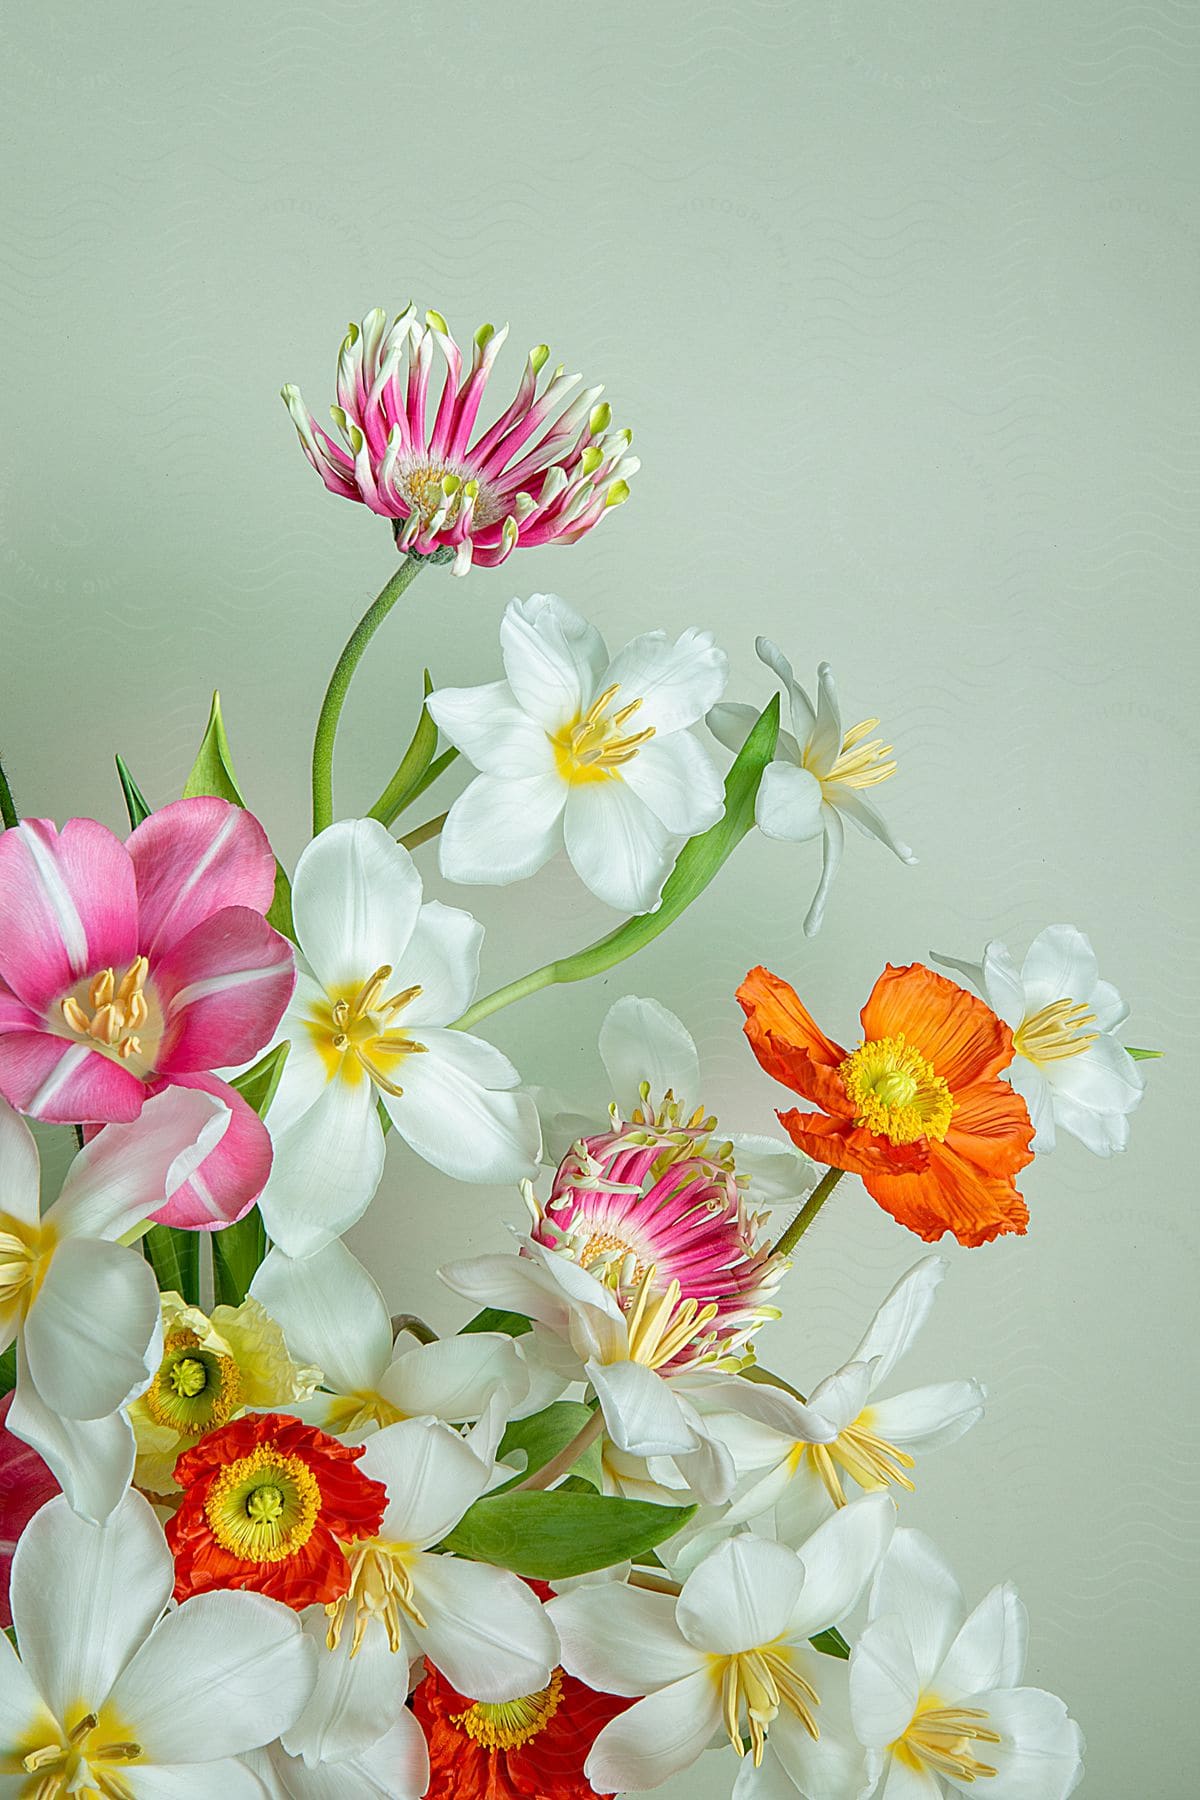 An arrangement of white, pink and orange flowers.